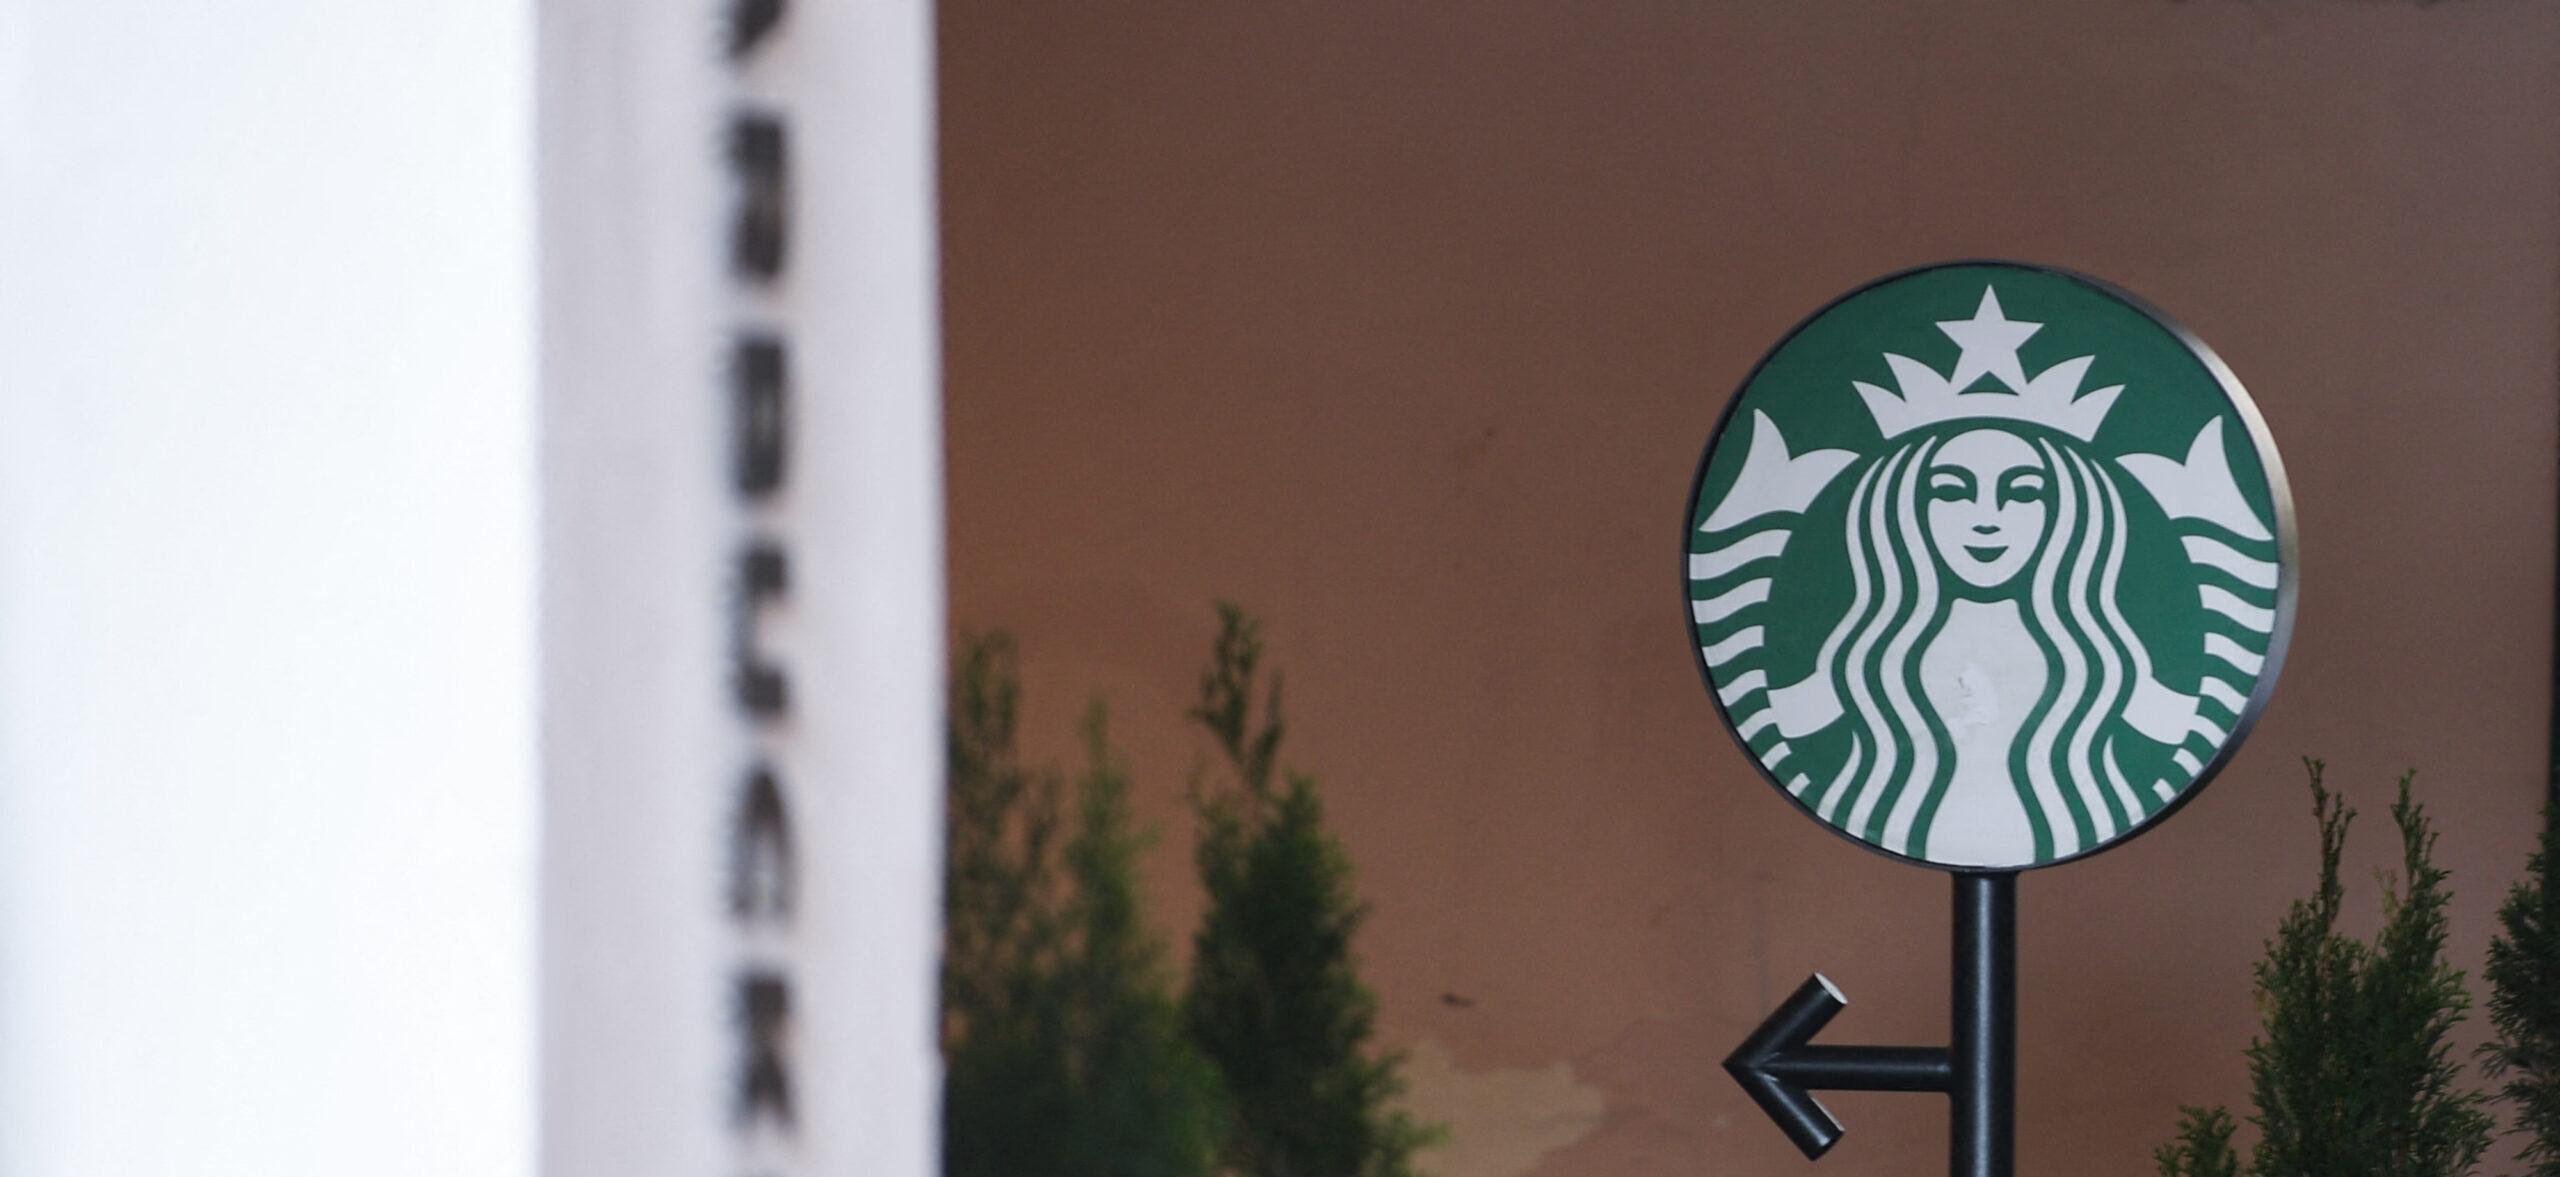 Starbucks Is Ready To Introduce A New Sustainable Cup